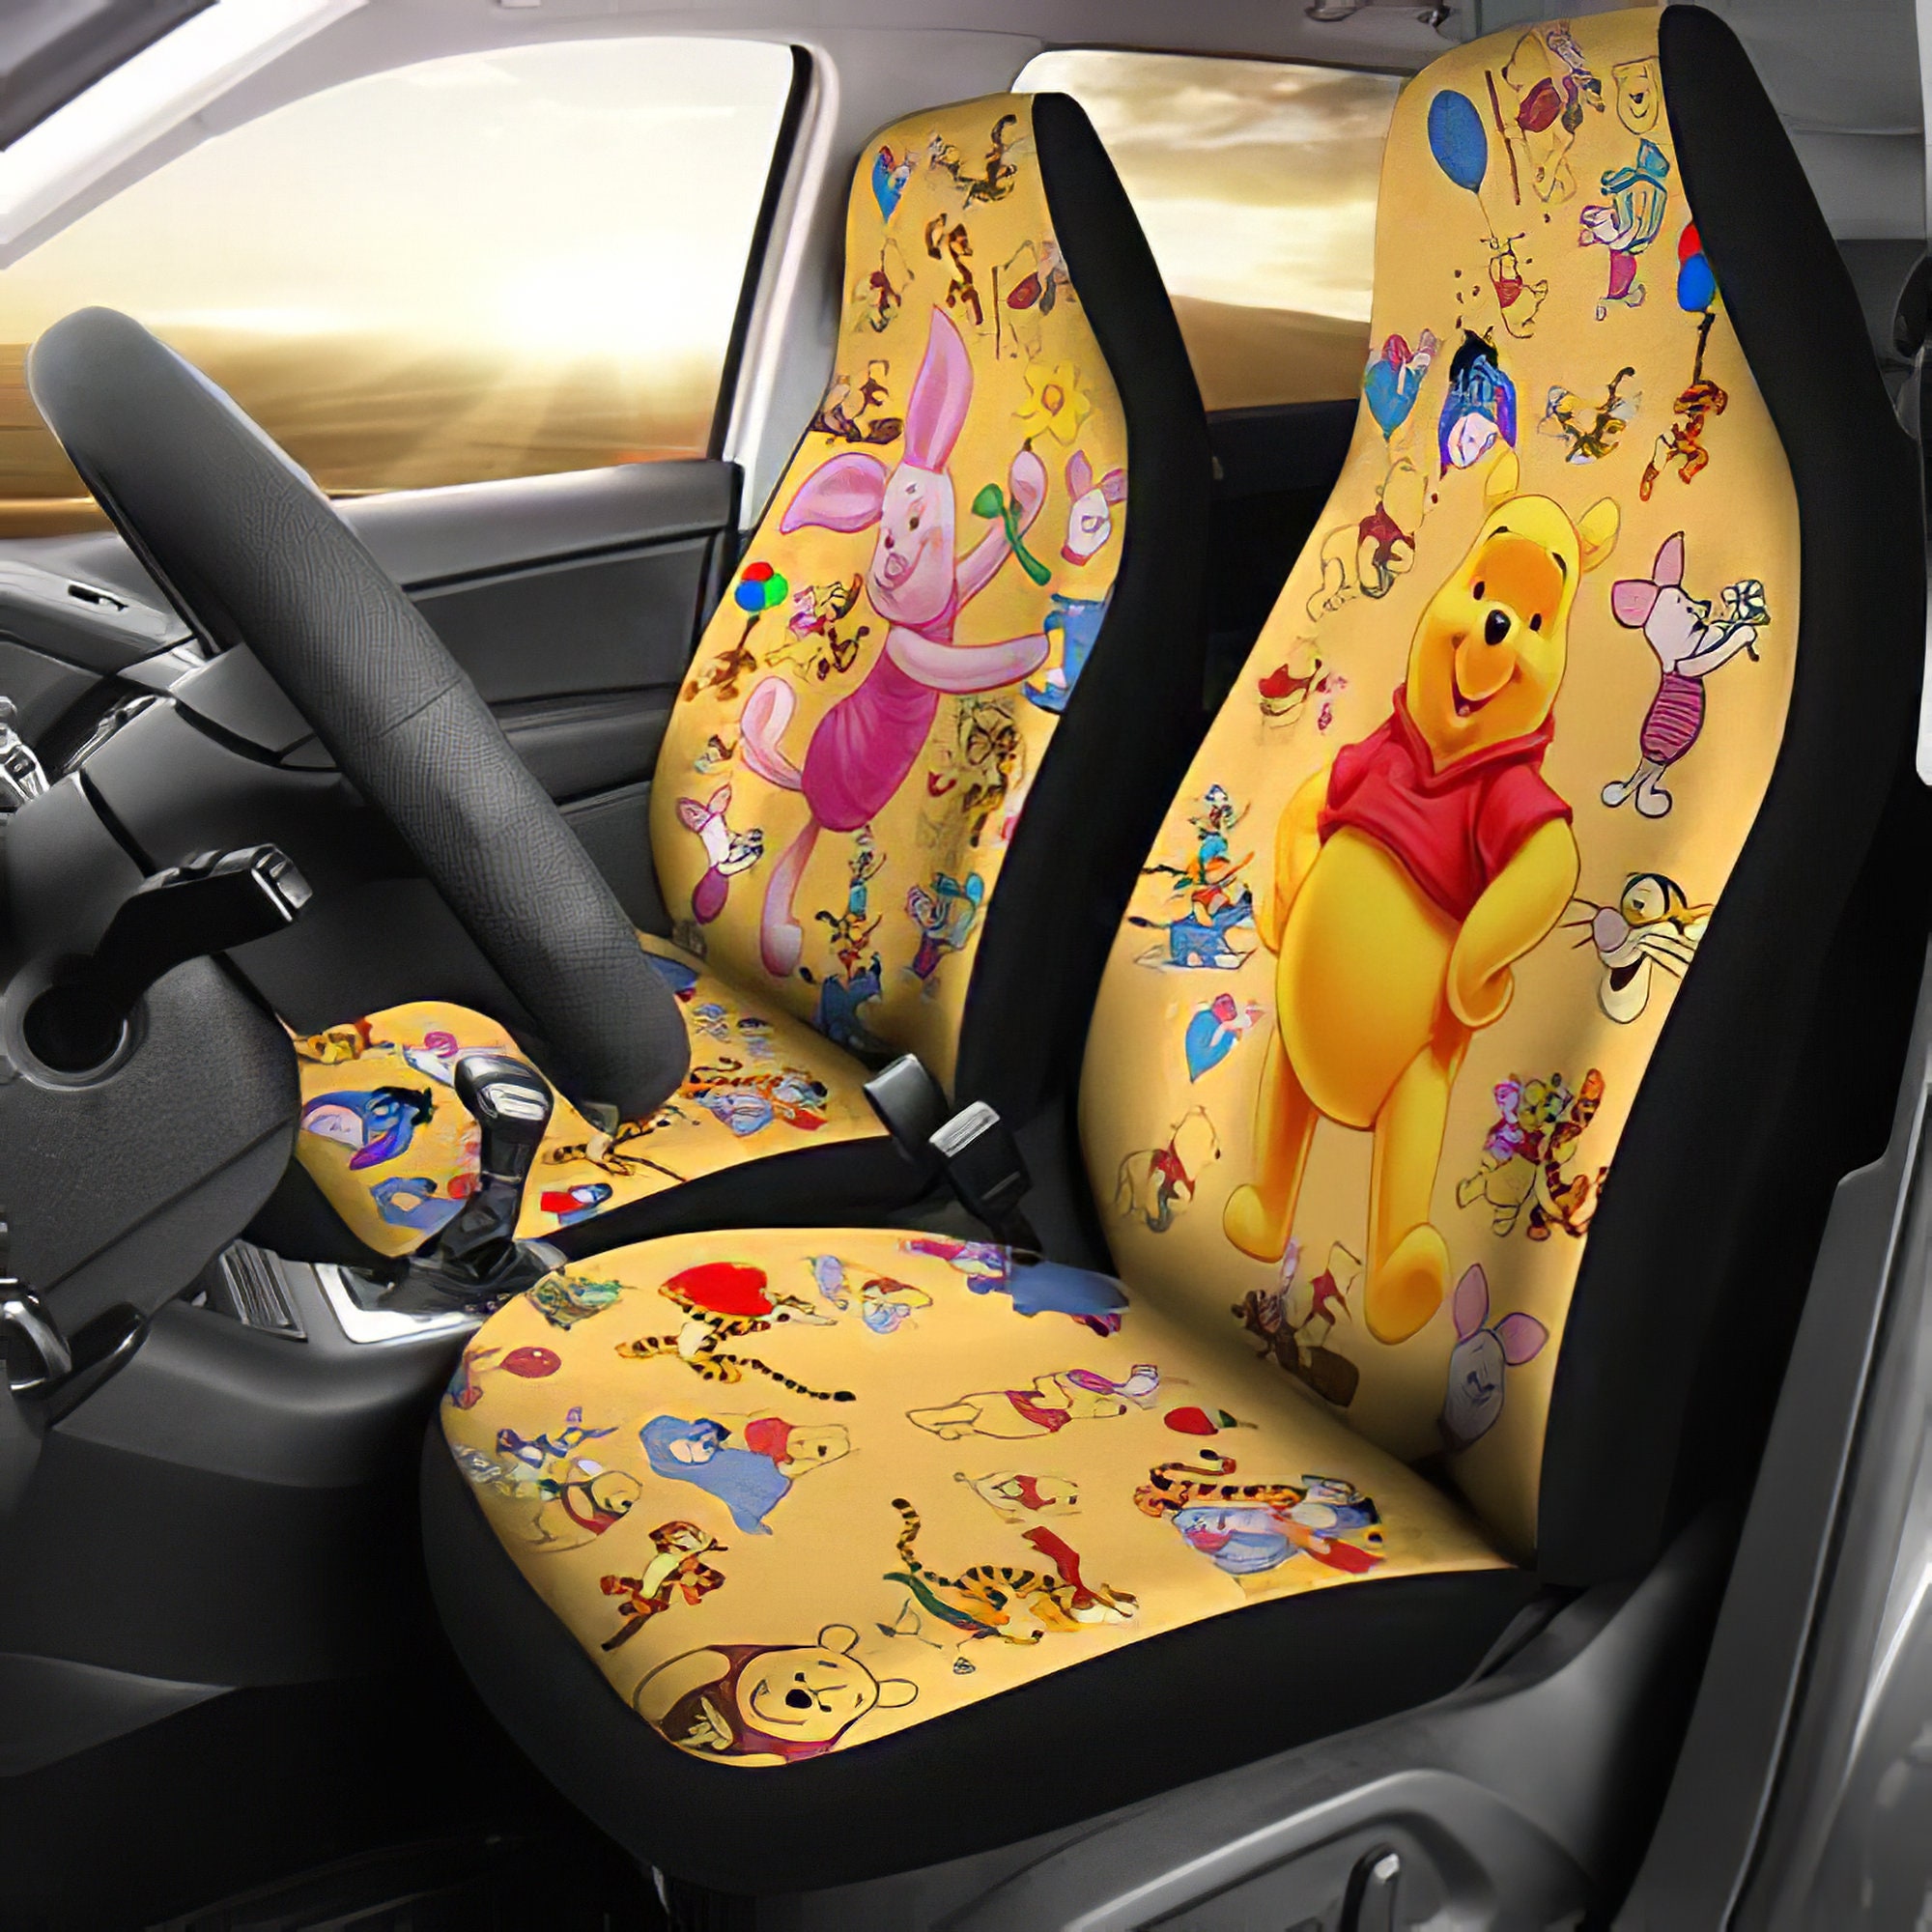 How to choose the best Winnie the Pooh car seat?{null}